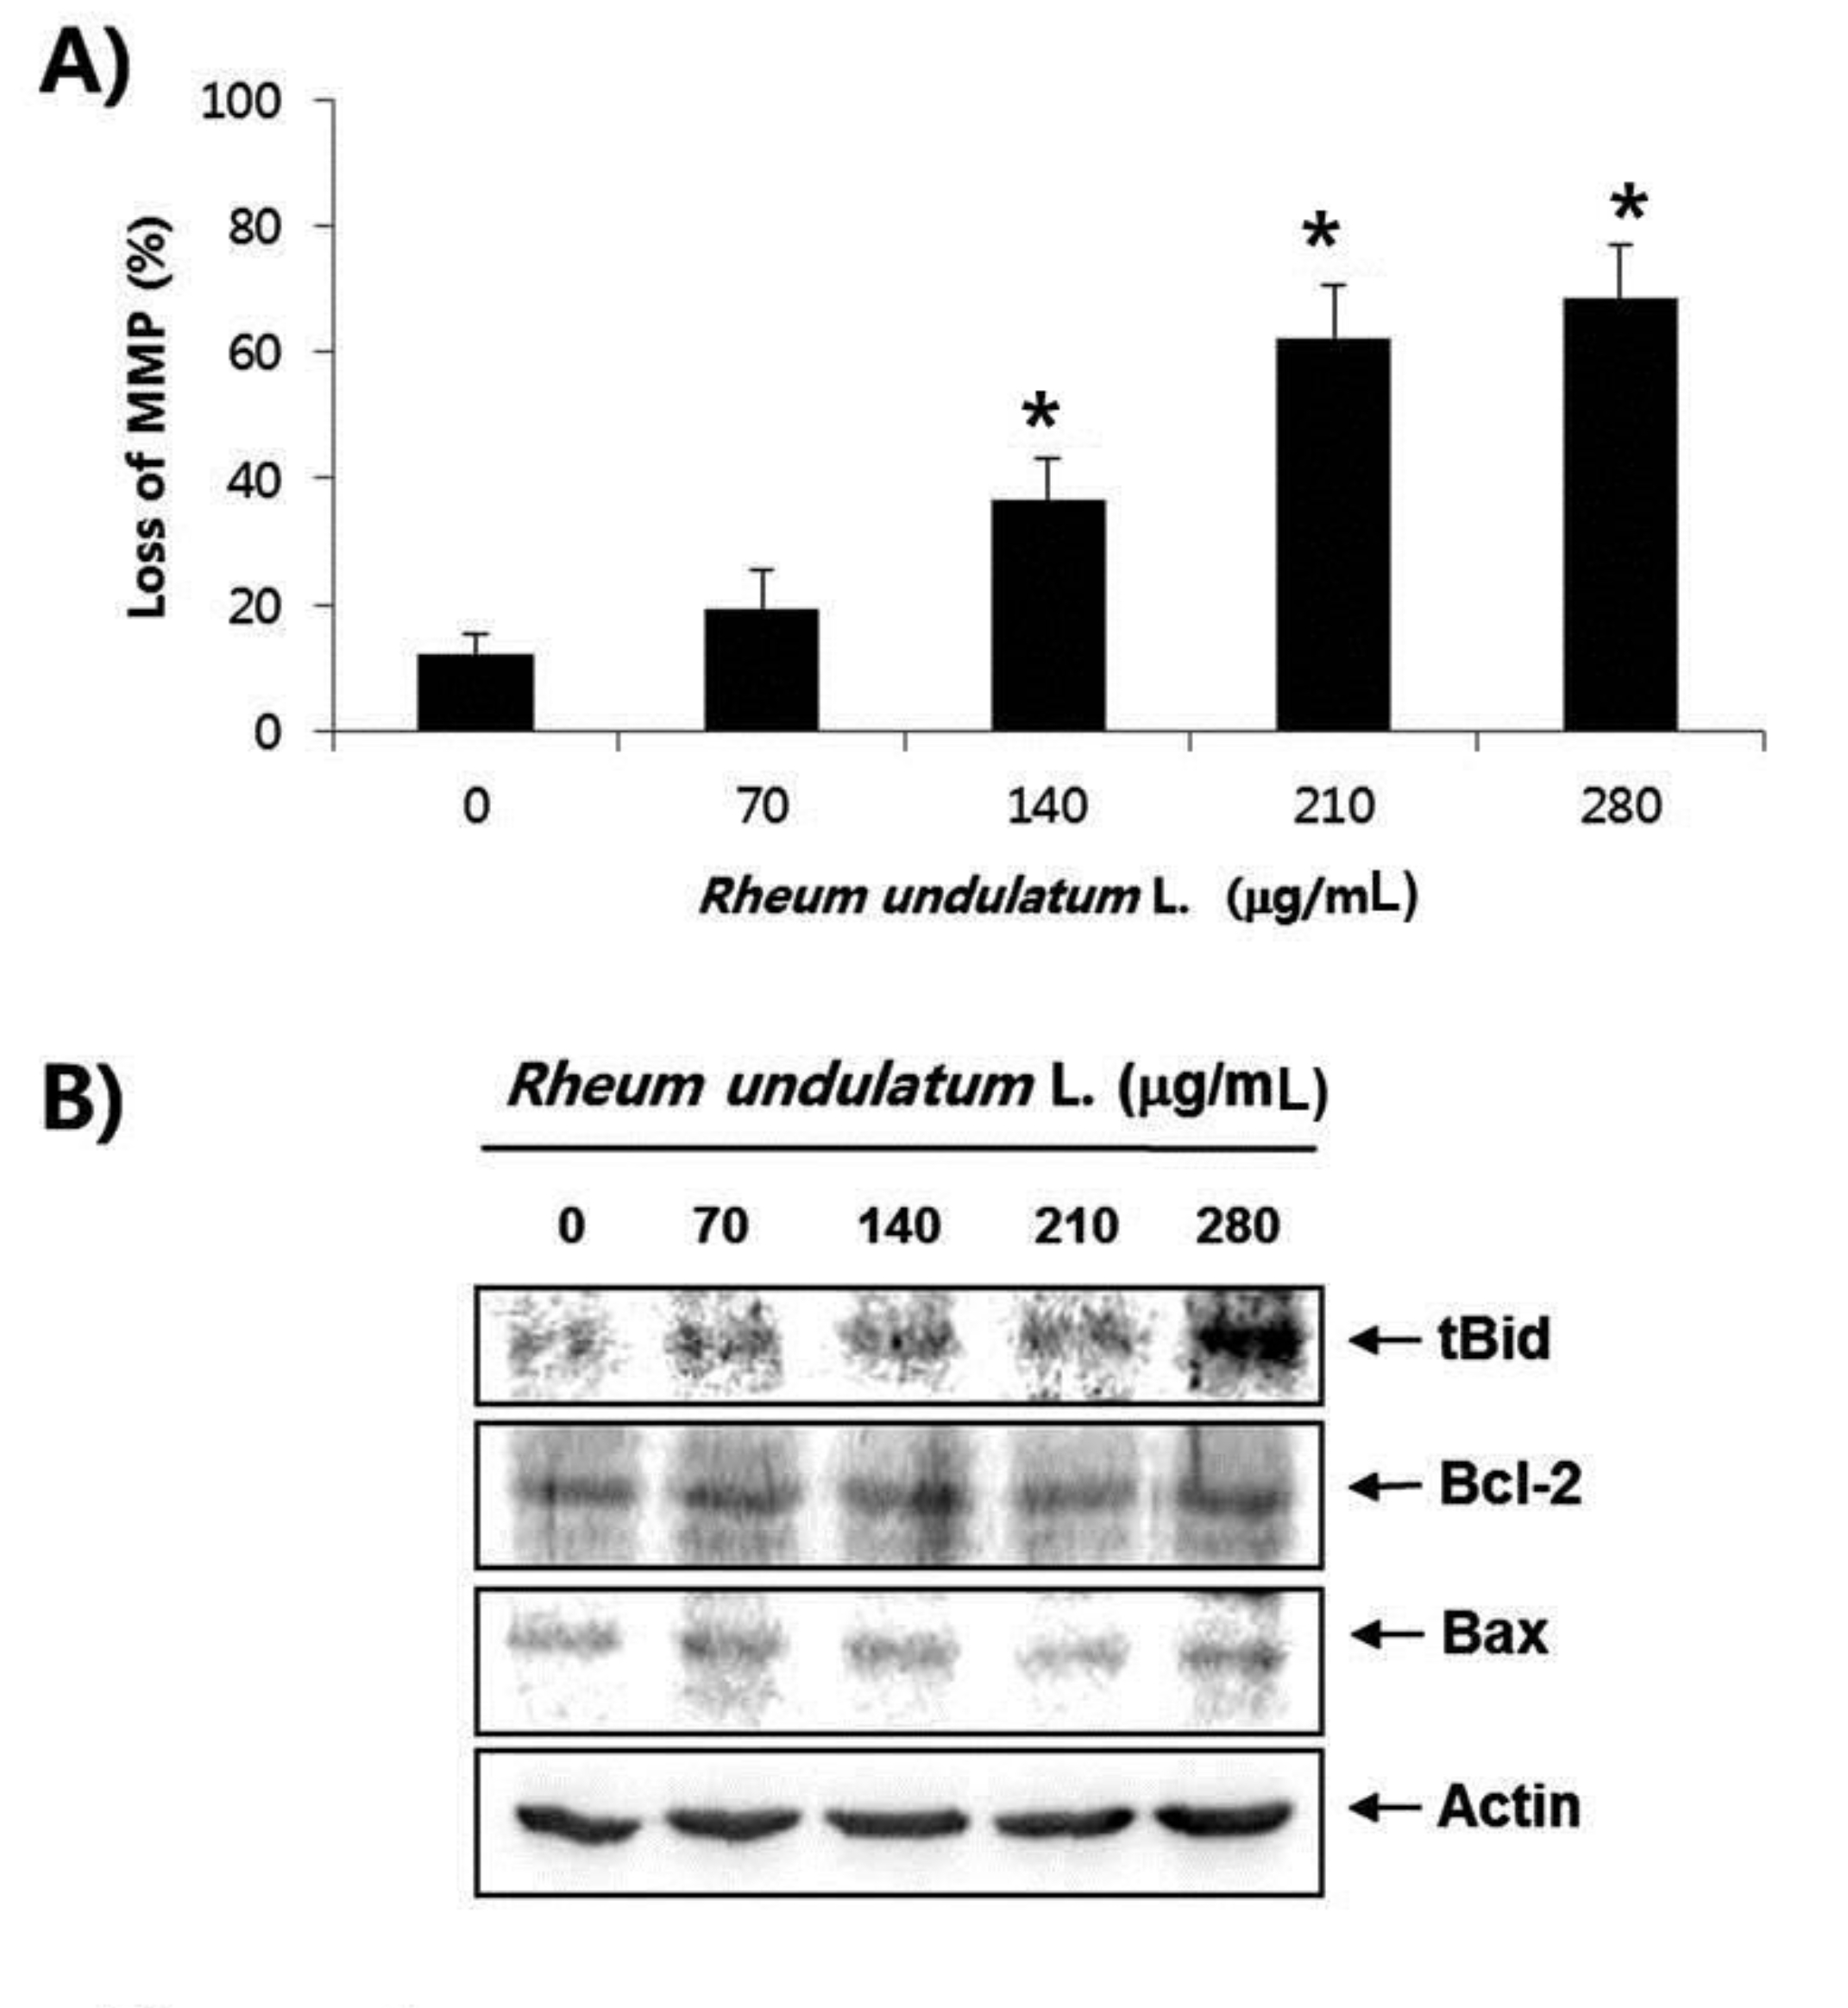 Effects of MERL on the MMP values and the levels of tBid, Bcl-2 and Bax proteins in AGS cells. (A) Cells were treated with the indicated concentration of MERL for 24 hours. Cells were collected and incubated with JC-1 (10 μM) for 20 minutes at 37˚C in the dark. The cells were the washed once with PBS and analyzed by a DNA flow cytometer. (B) The cell lysates obtained from cells grown under the same conditions as (A) were separated by SDS-polyacrylamide gels and transferred onto nitrocellulose membranes. The membranes were probed with the indicated antibodies. Actin was used as an internal control. Bars represent the mean ± S.D. *P < 0.01. MERL, methanol extract of Rheum undulatum L.; MMP, mitochondrial membrane potential; tBid, truncated Bid; Bcl-2, B-cell lymphoma 2; Bax, Bcl2 Antagonist X; AGS, adenocarcinoma gastric cell lines; JC-1, 5,5′, 6,6′-tetrachloro-1,1′,3,3′-tetraethyl-imidacarbocyanine iodide; PBS, phosphate buffered saline; SDS, sodium dodecyl sulfate; S.D., standard deviation.